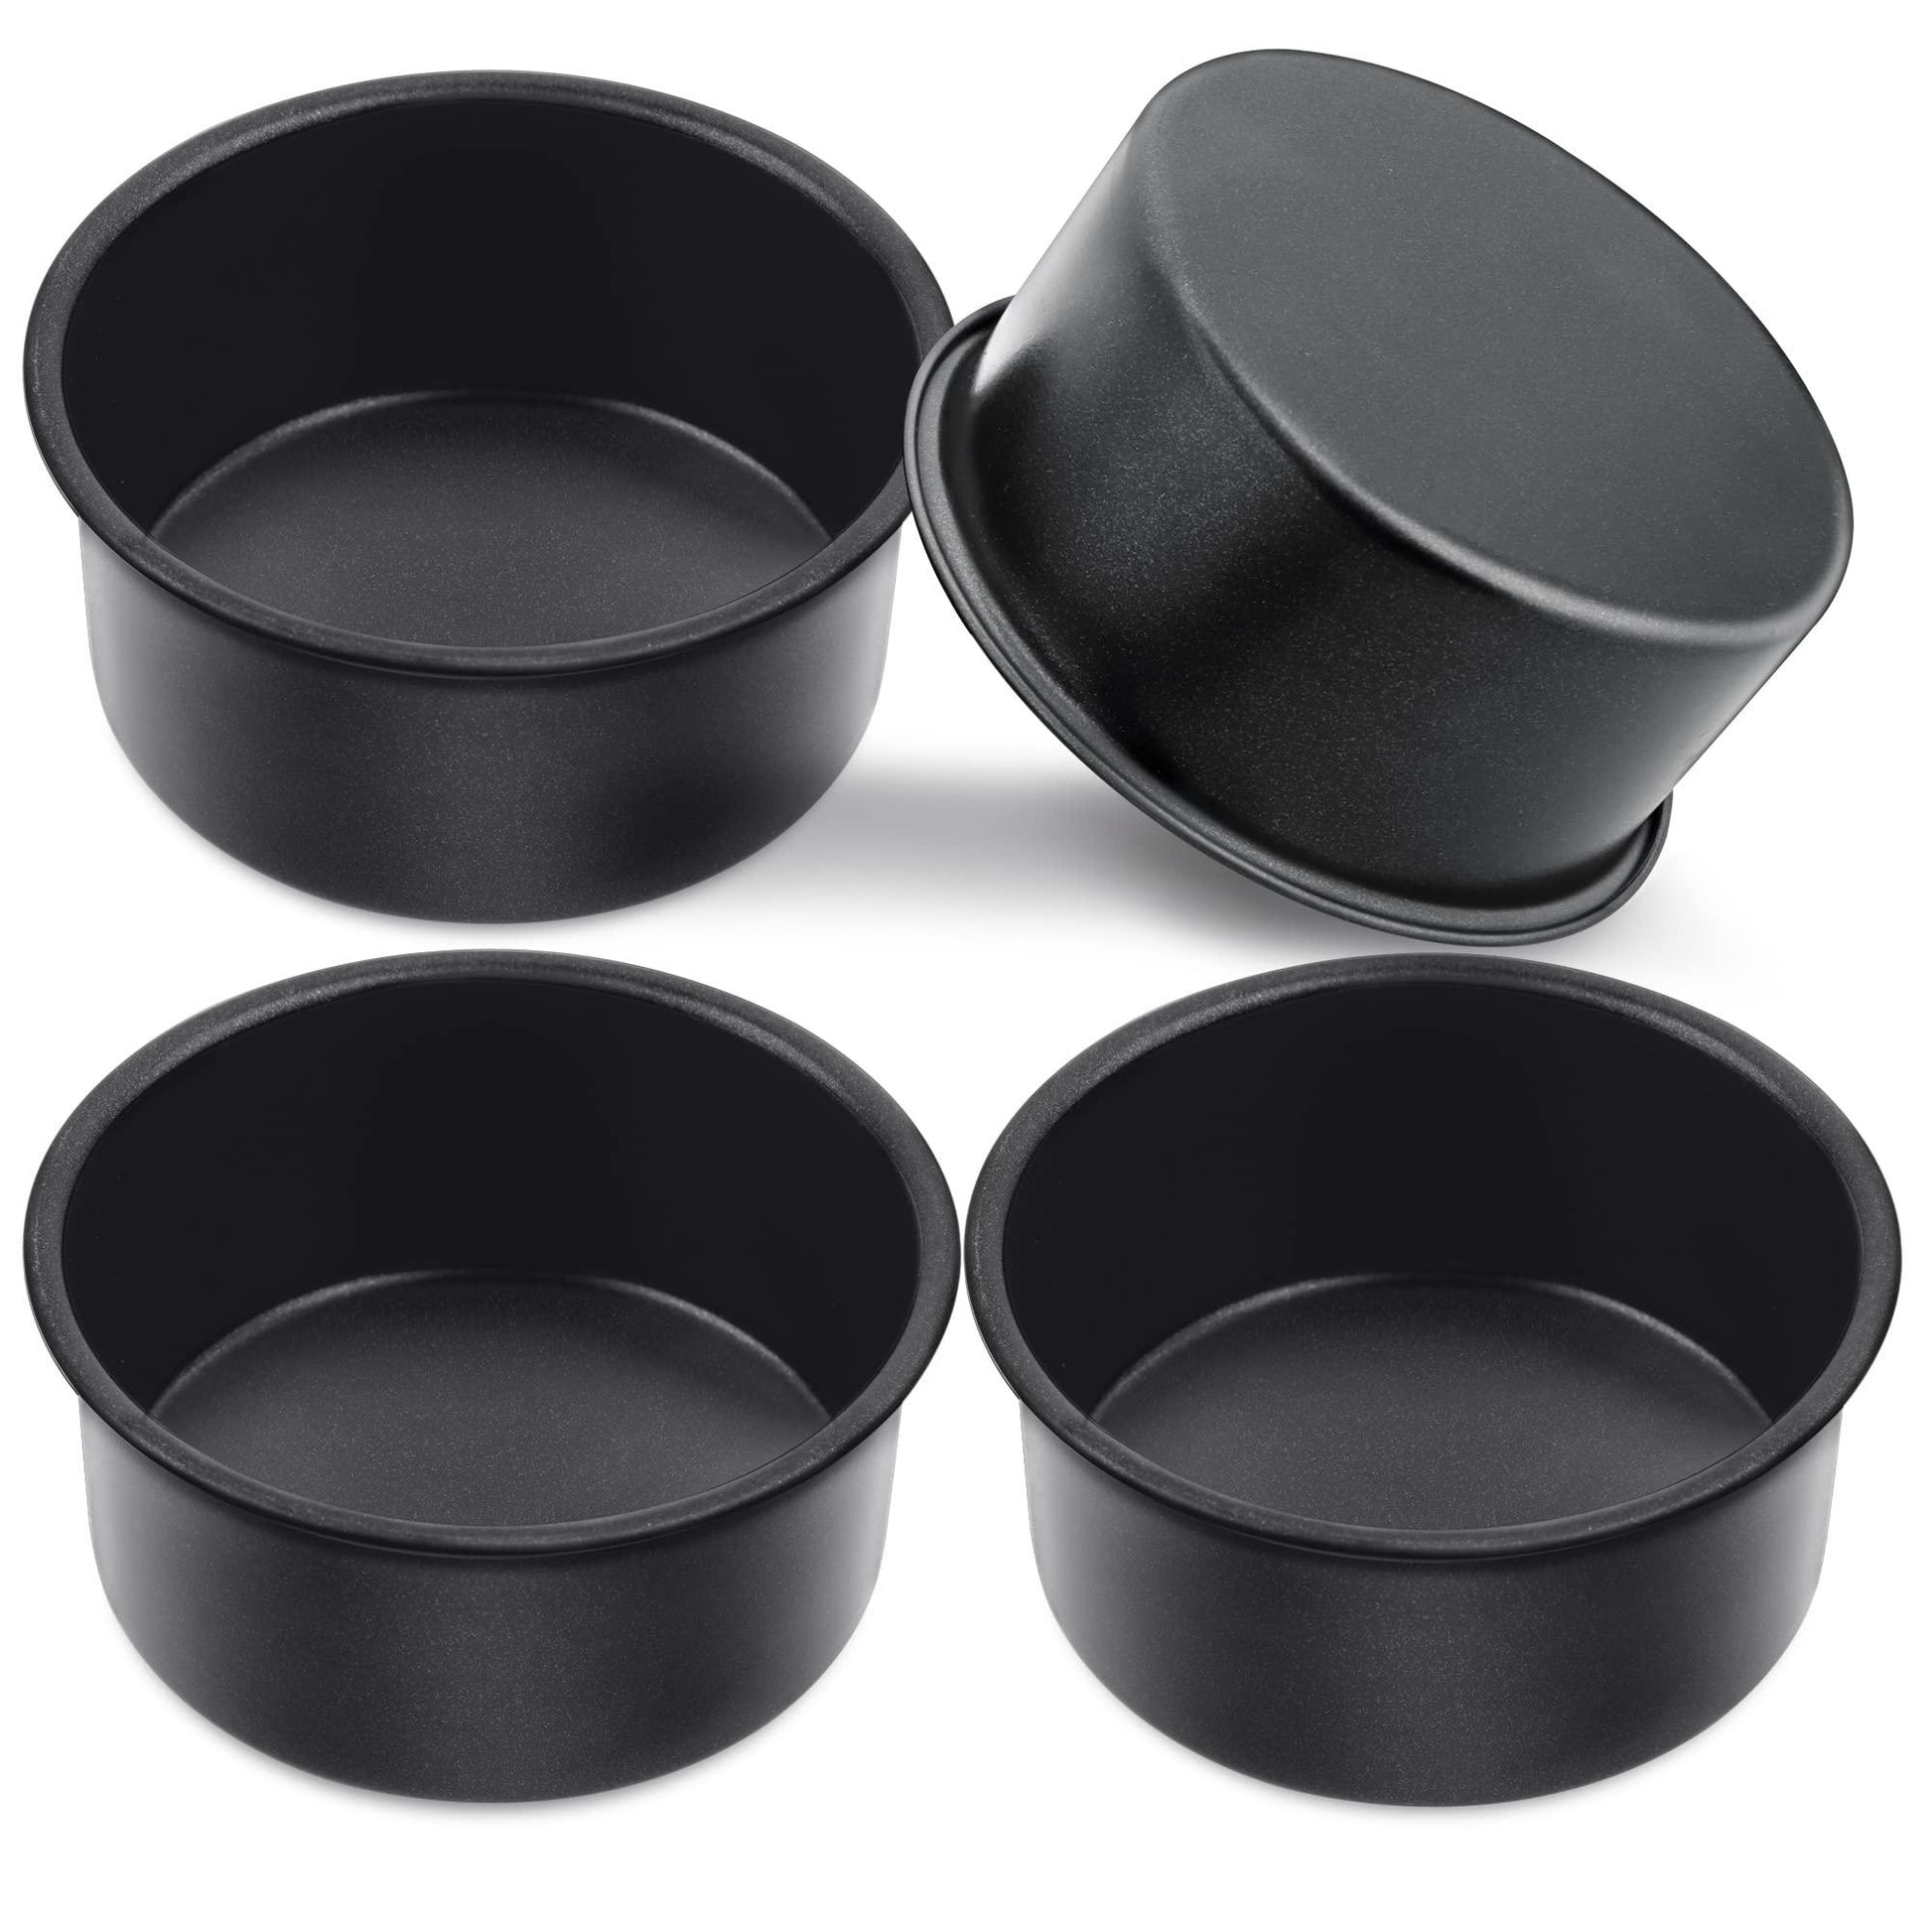 E-far 4 Inch Cake Pan, 4-Piece Nonstick Round Cake Baking Pans for Wedding, Birthday, Layer Cake, Stainless Steel Core & Non-Toxic Coating, 2 Inch Deep - CookCave